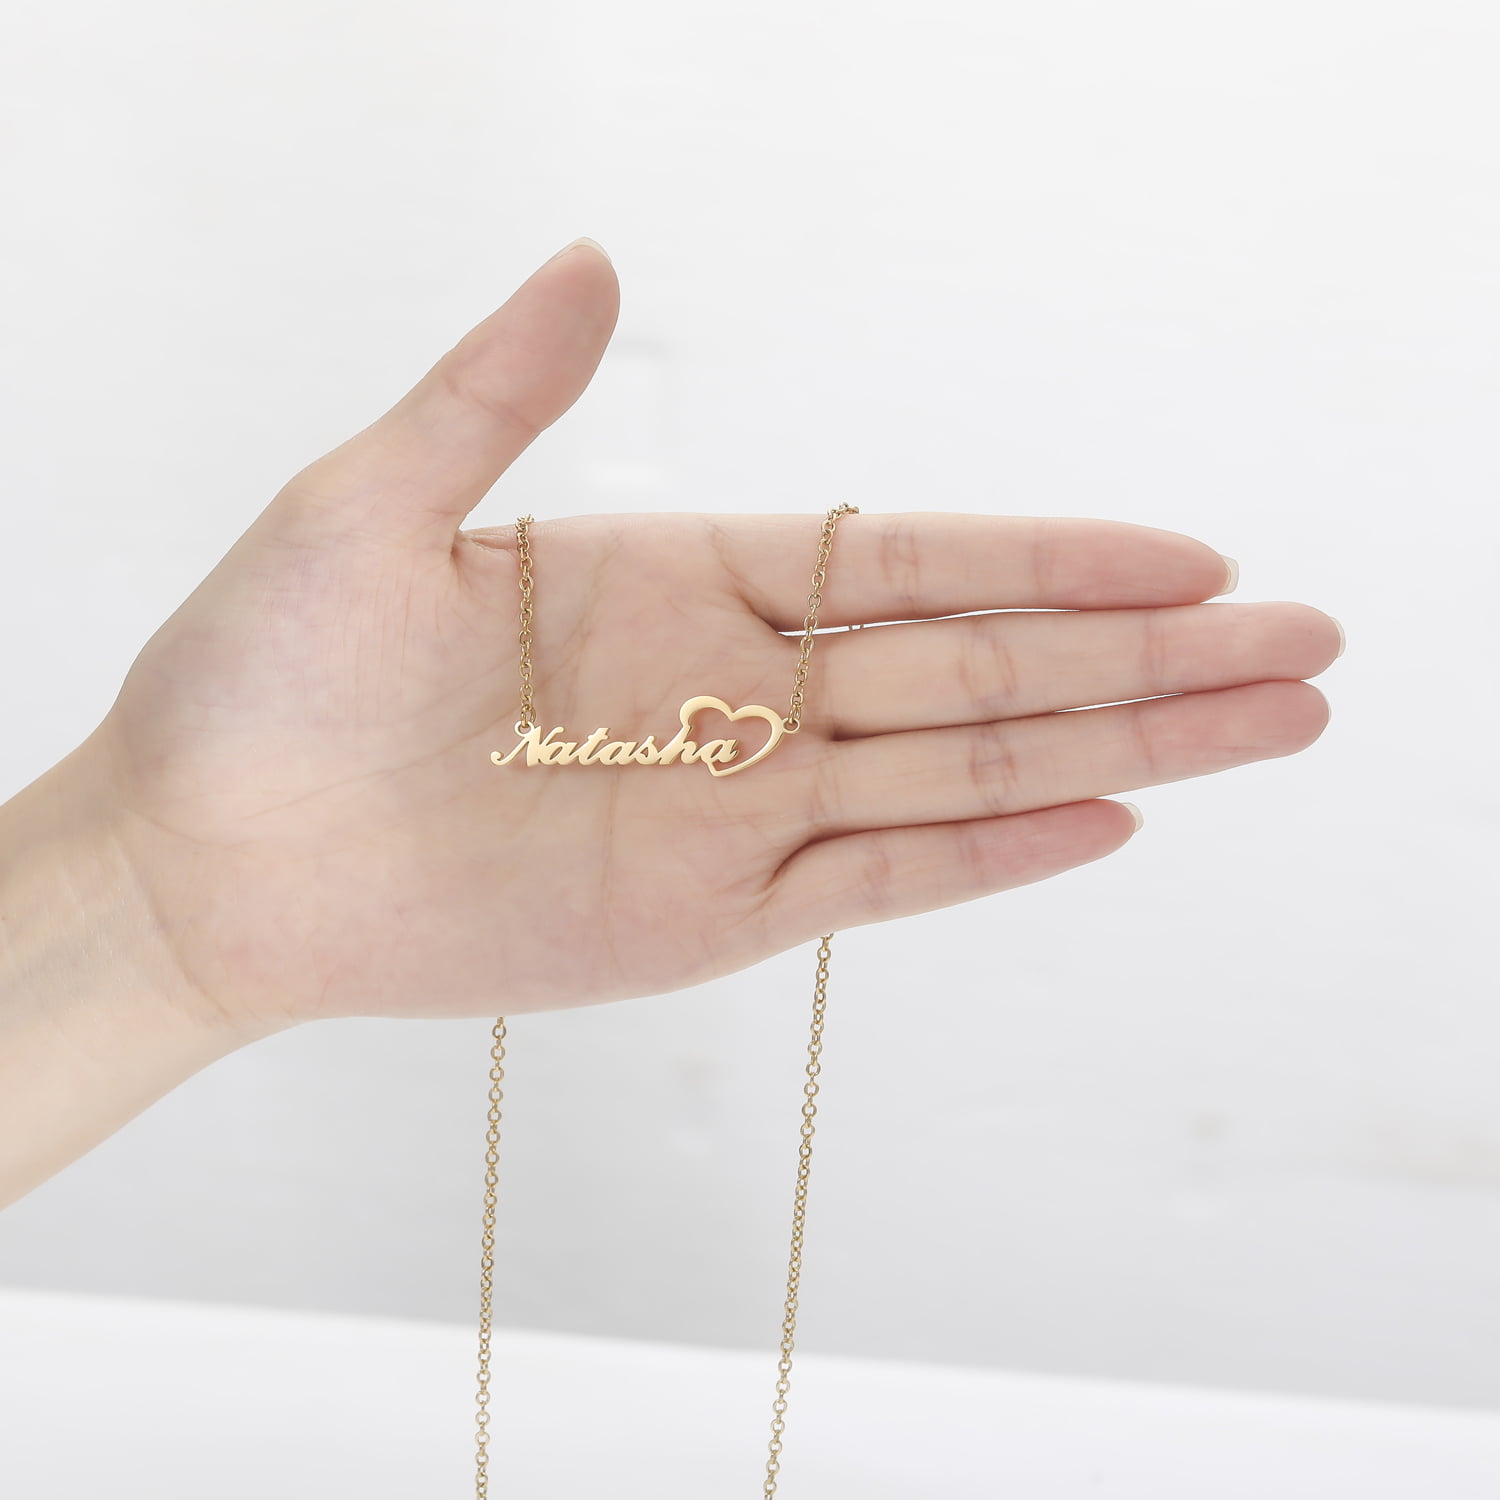 Personalized Custom Name Necklace SChoker Handwritten Name Pendant Necklace  Jewelry For Women Gifts Mauritius brand – RIALLUX.CO